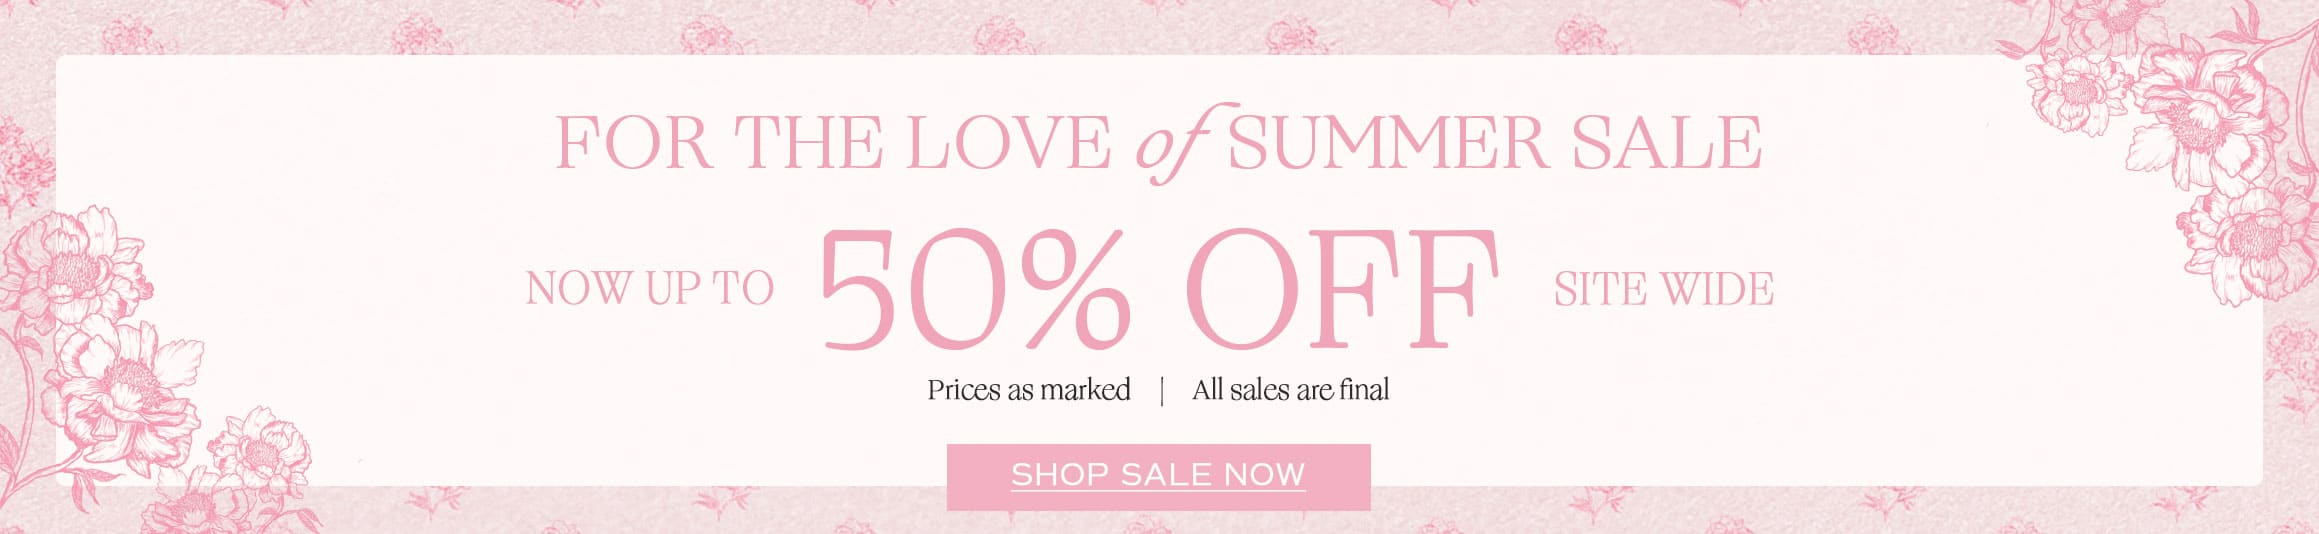 For the love of summmer sale, take 50% all items sitewide